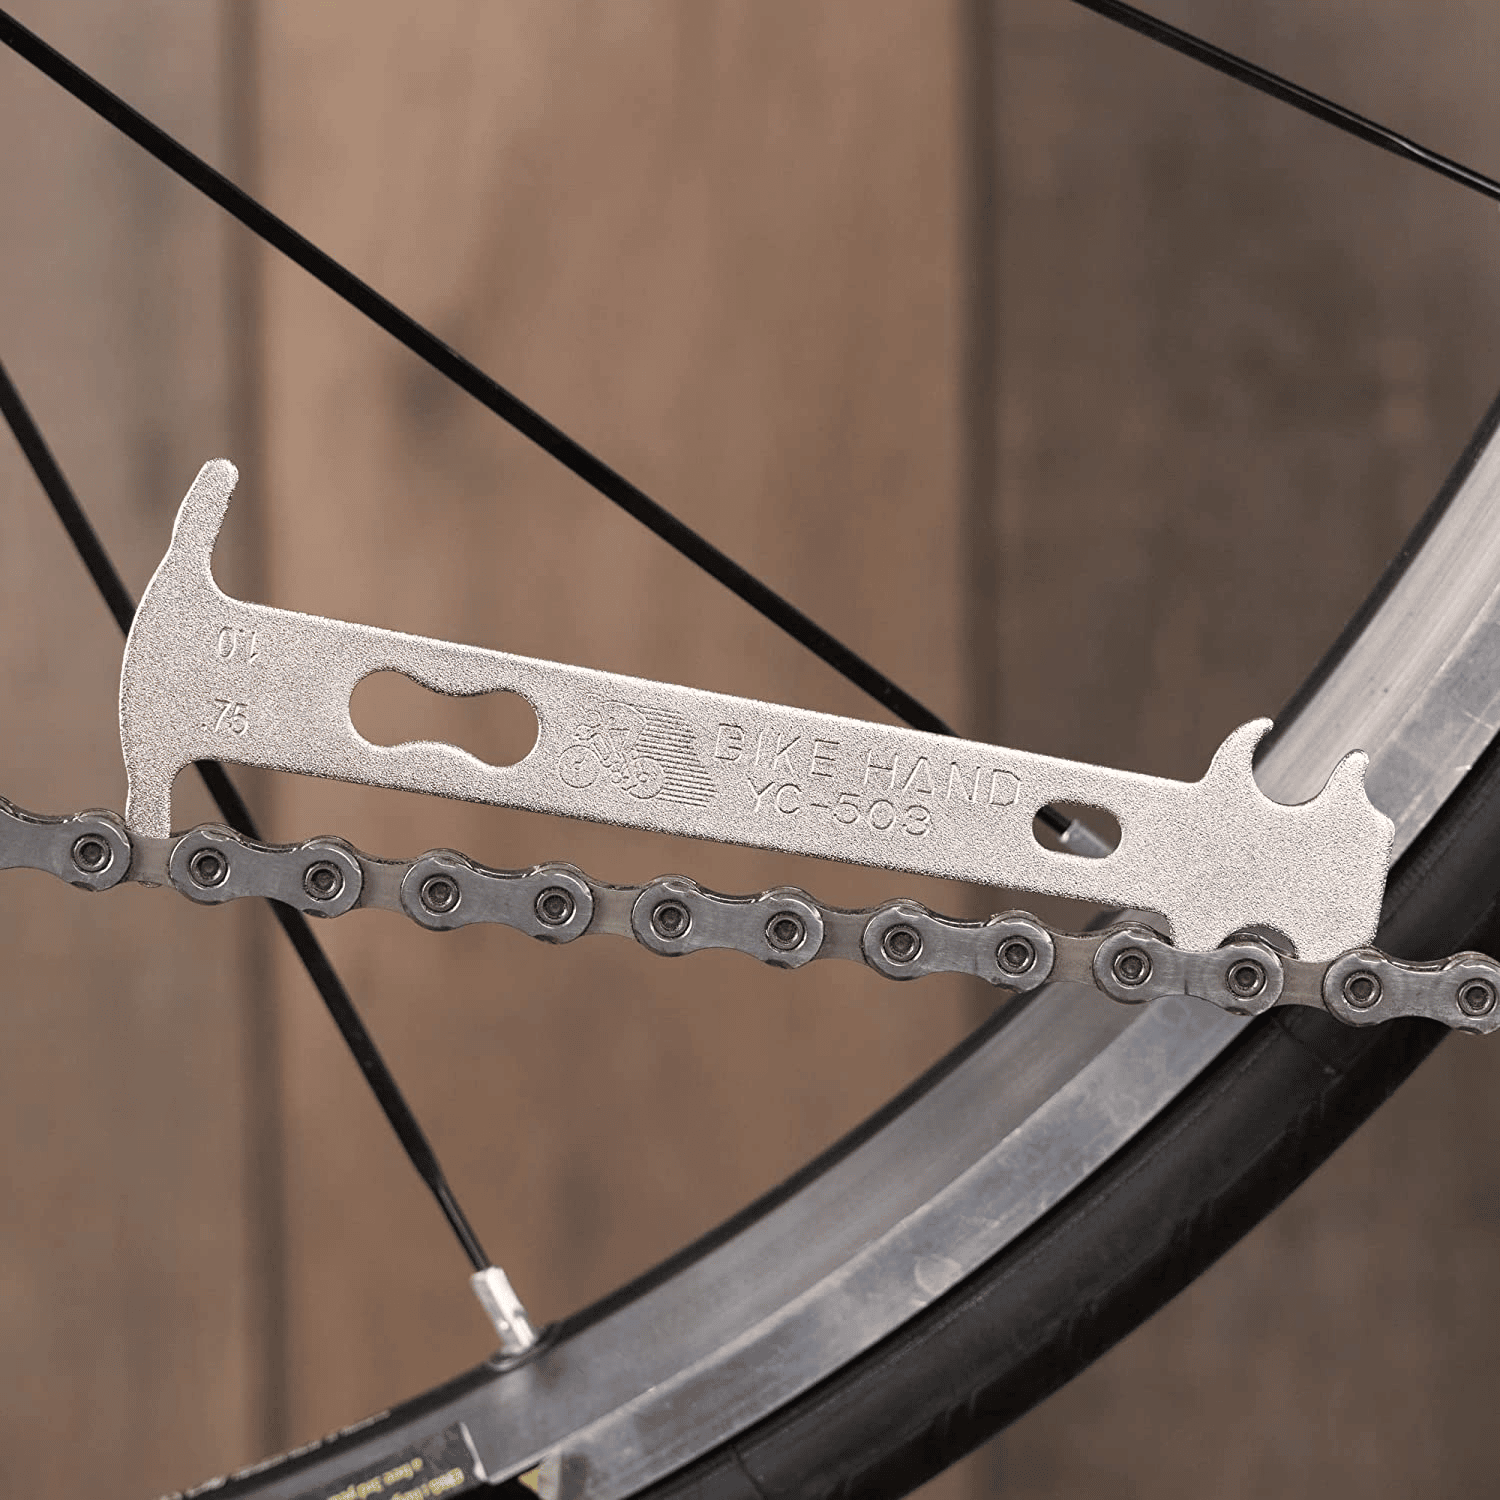 If your mountain bike chain is too long, it could be because it has stretched so check for this with a chain wear indicator tool.